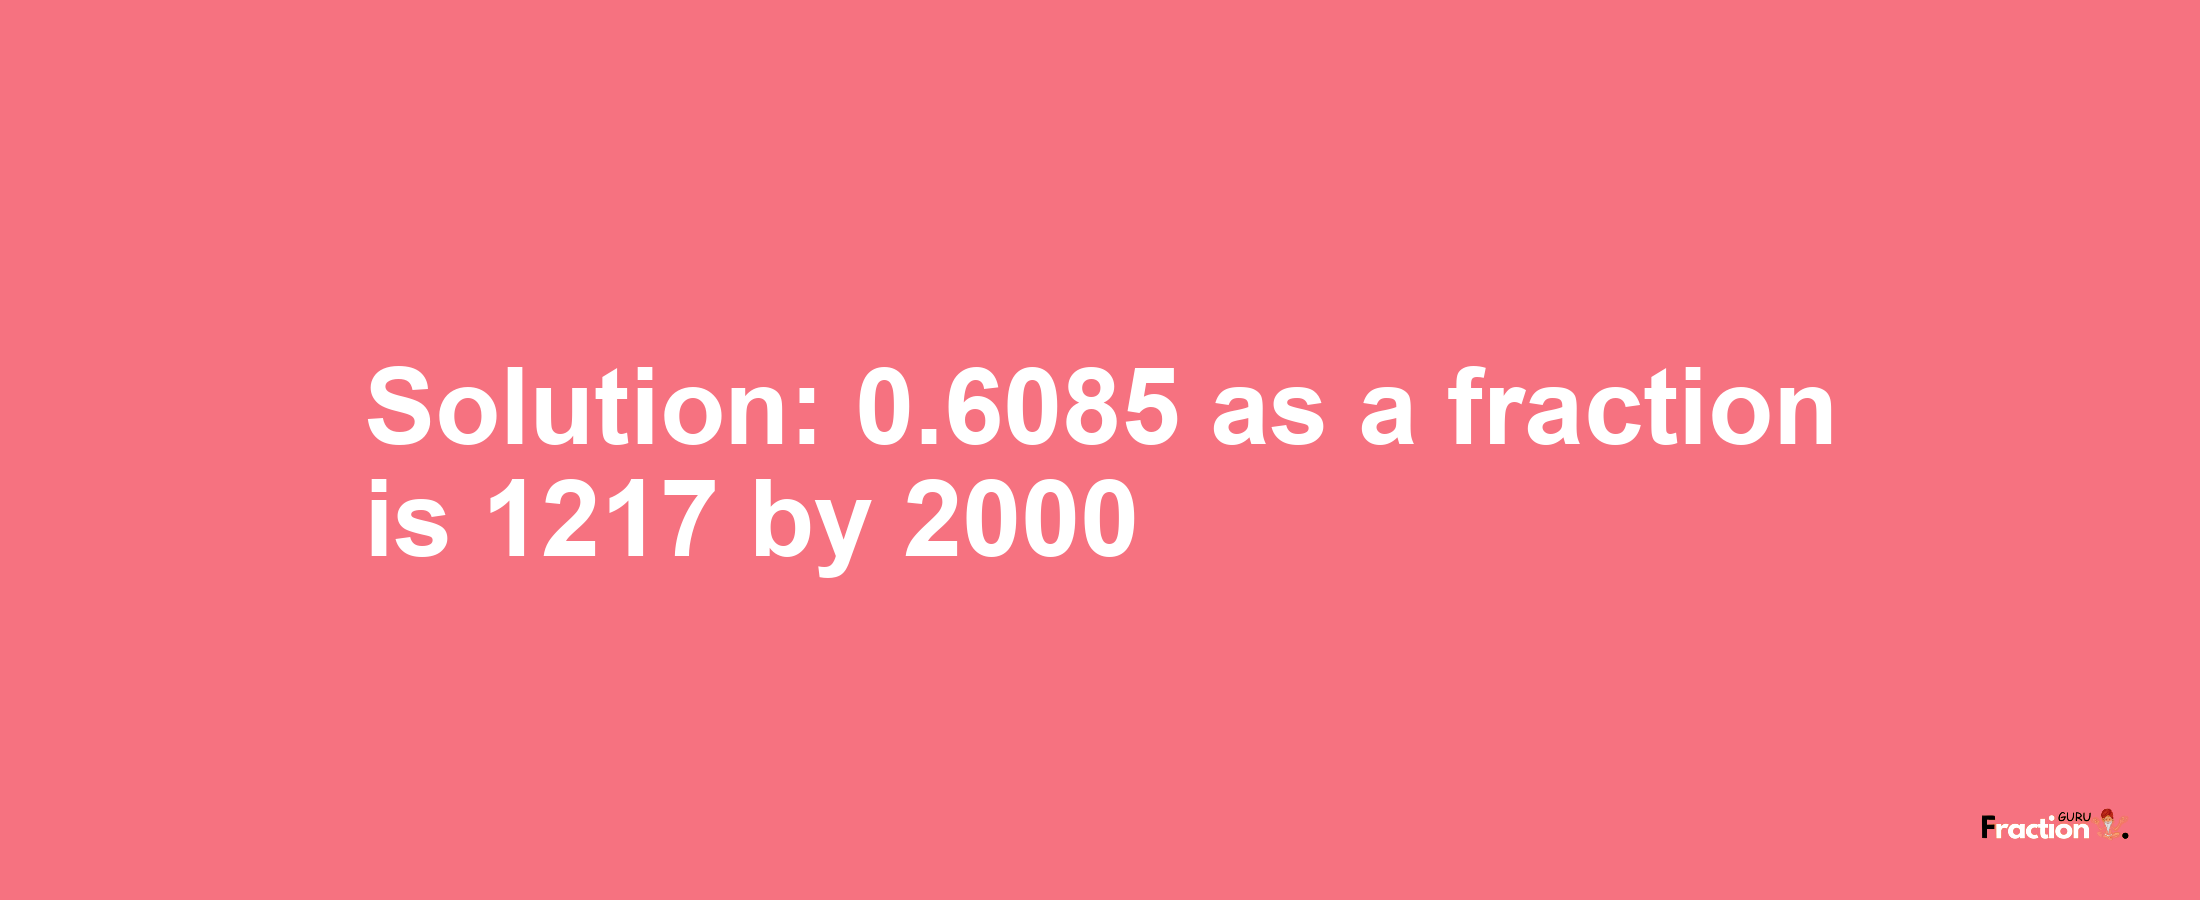 Solution:0.6085 as a fraction is 1217/2000